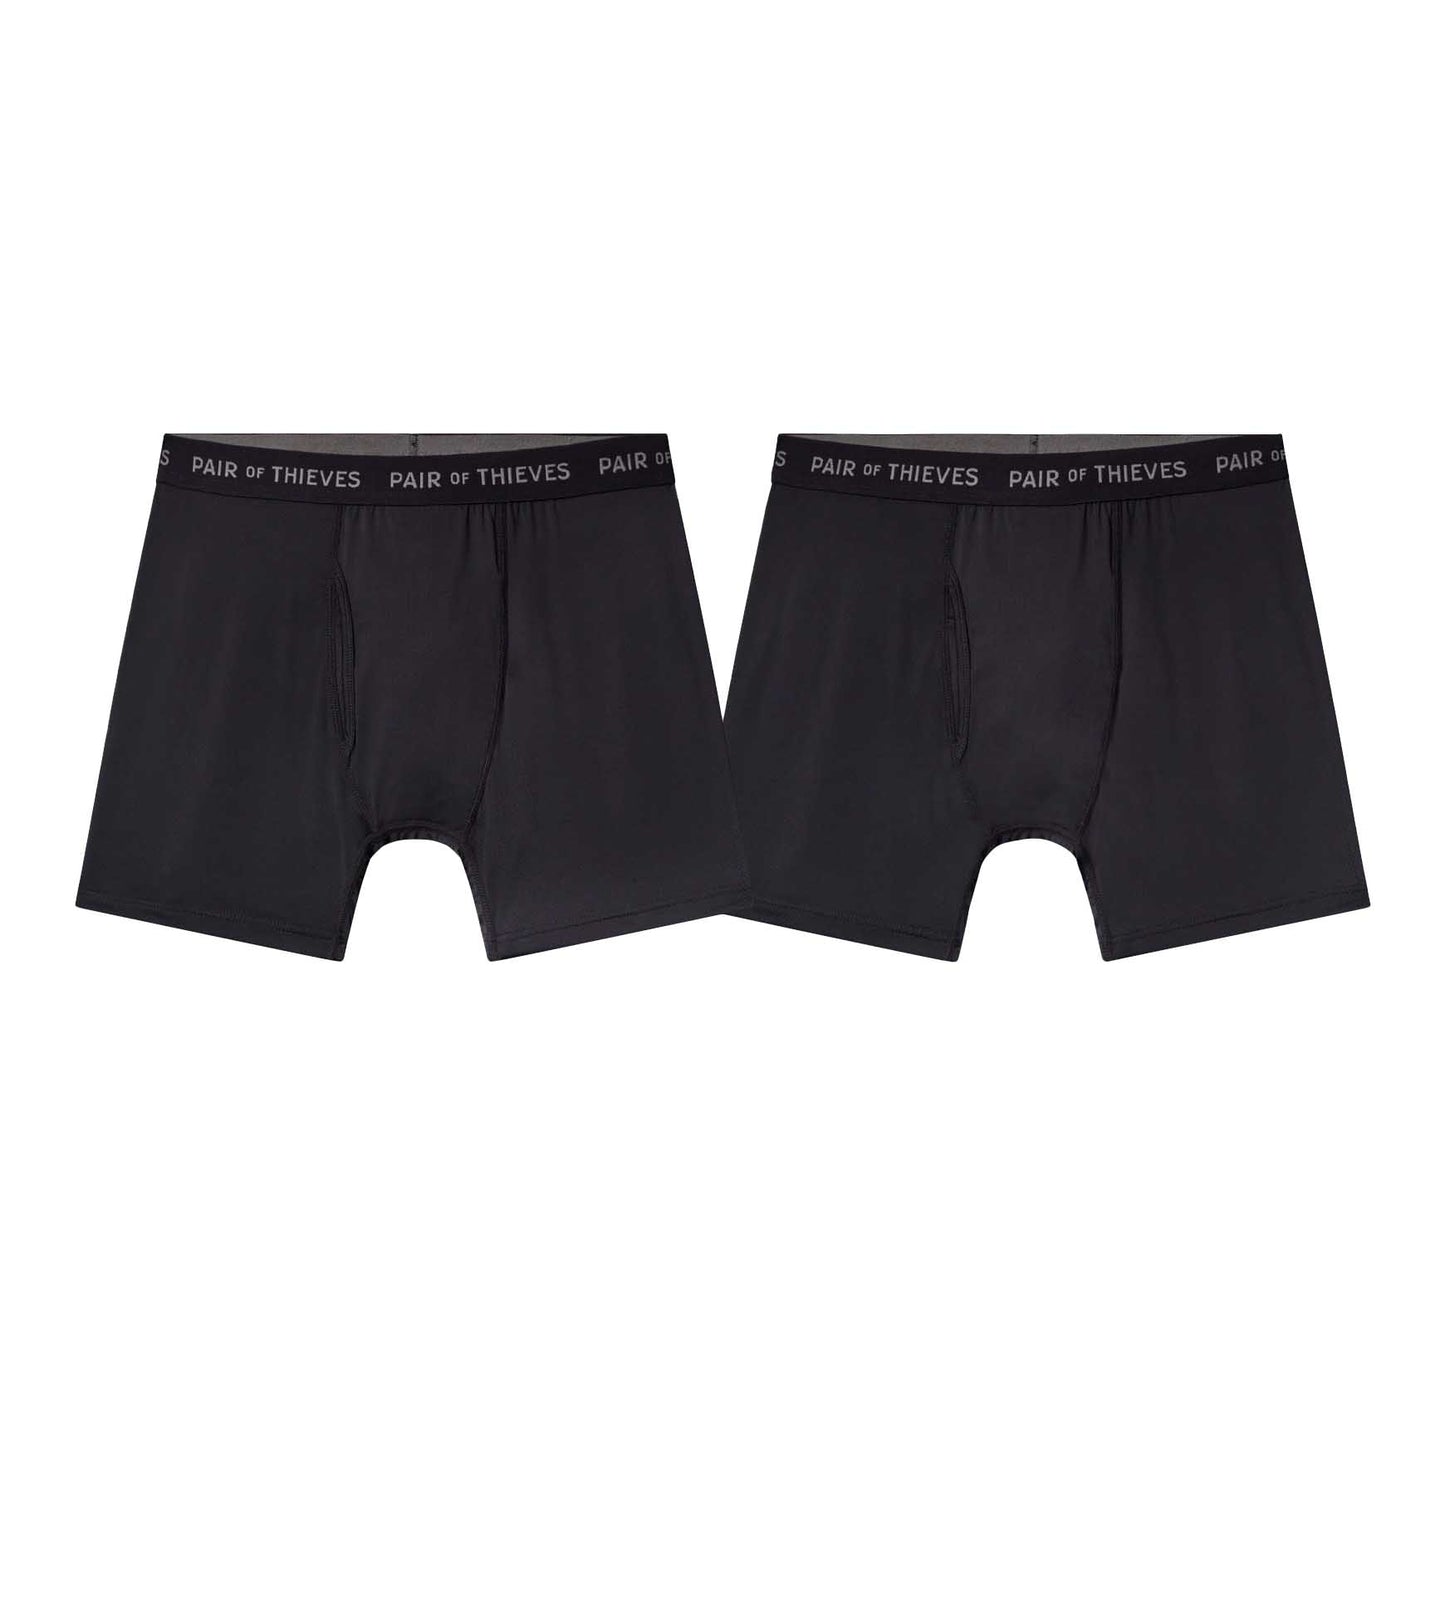 Mens Pack Of 4 Eco Dim Boxers Black Size Xl